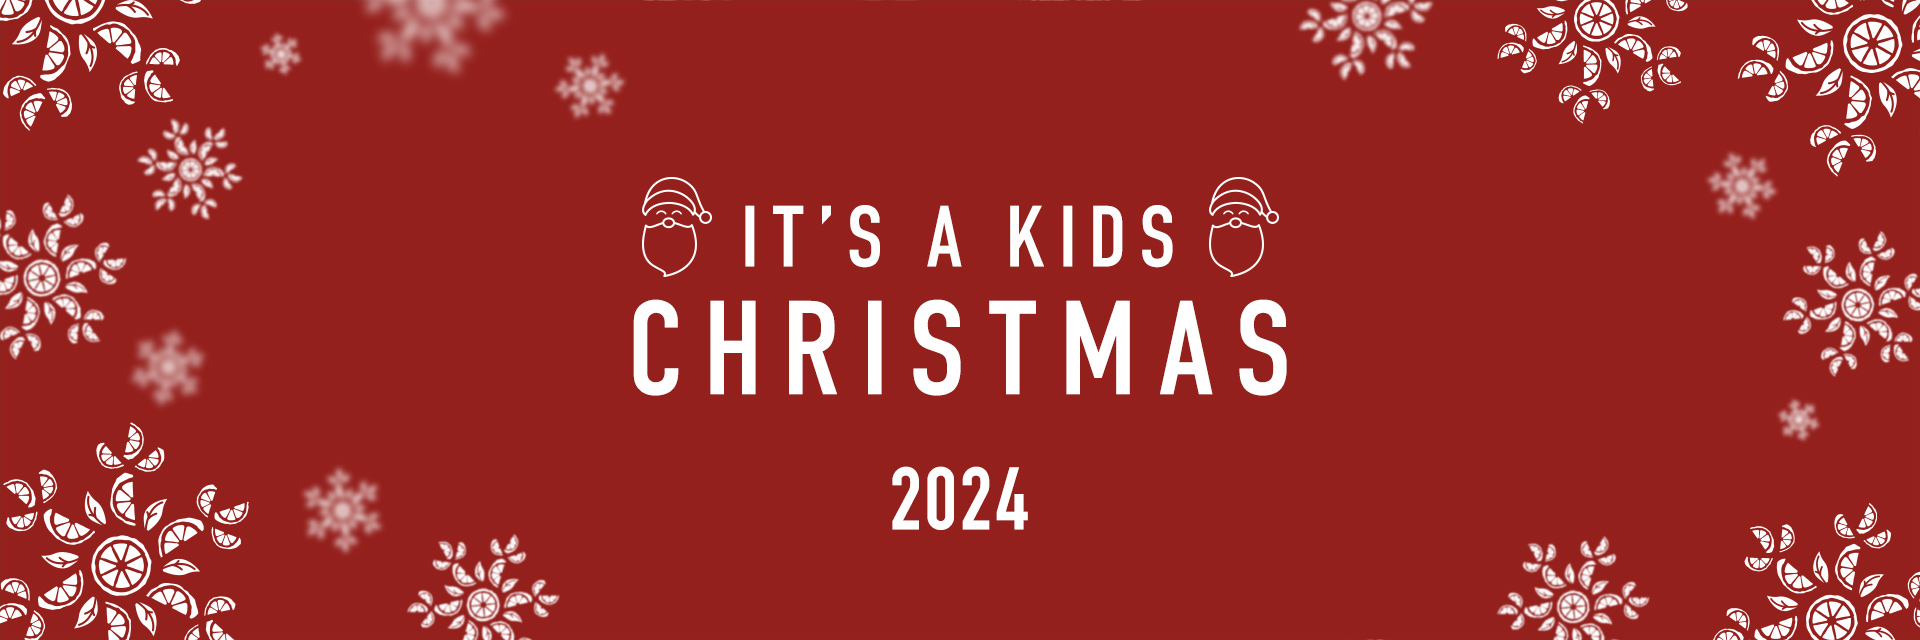 Kids Christmas Menu 2024 at The Old Castle